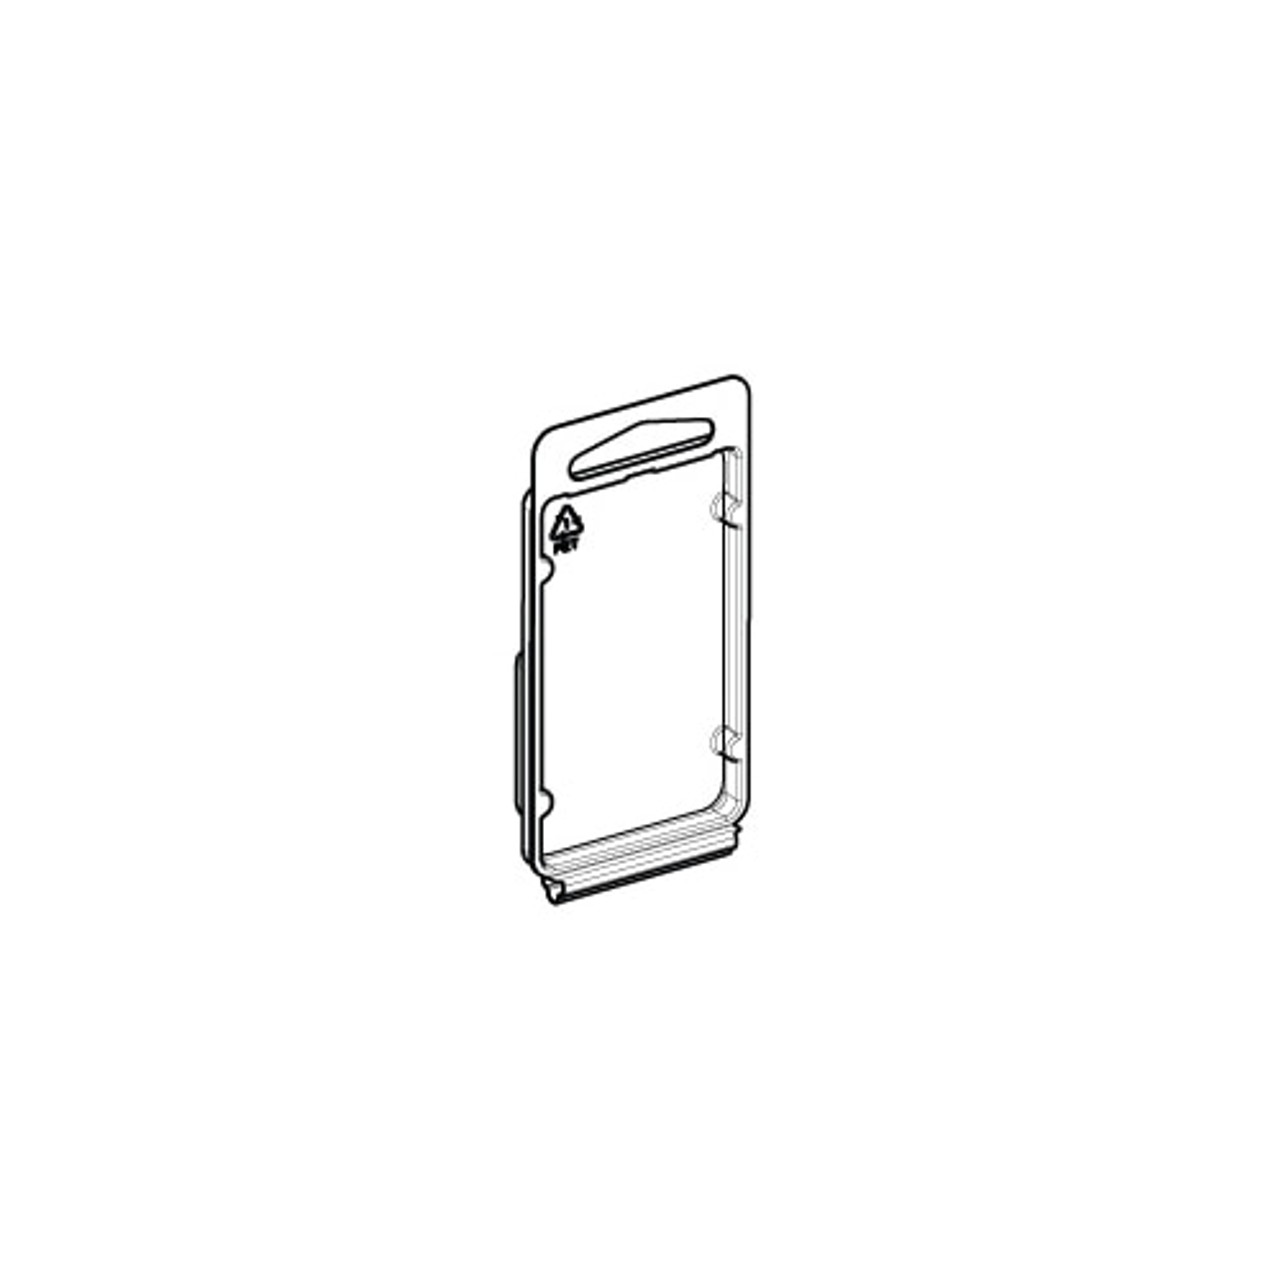 966392 - Stock Clamshell Packaging